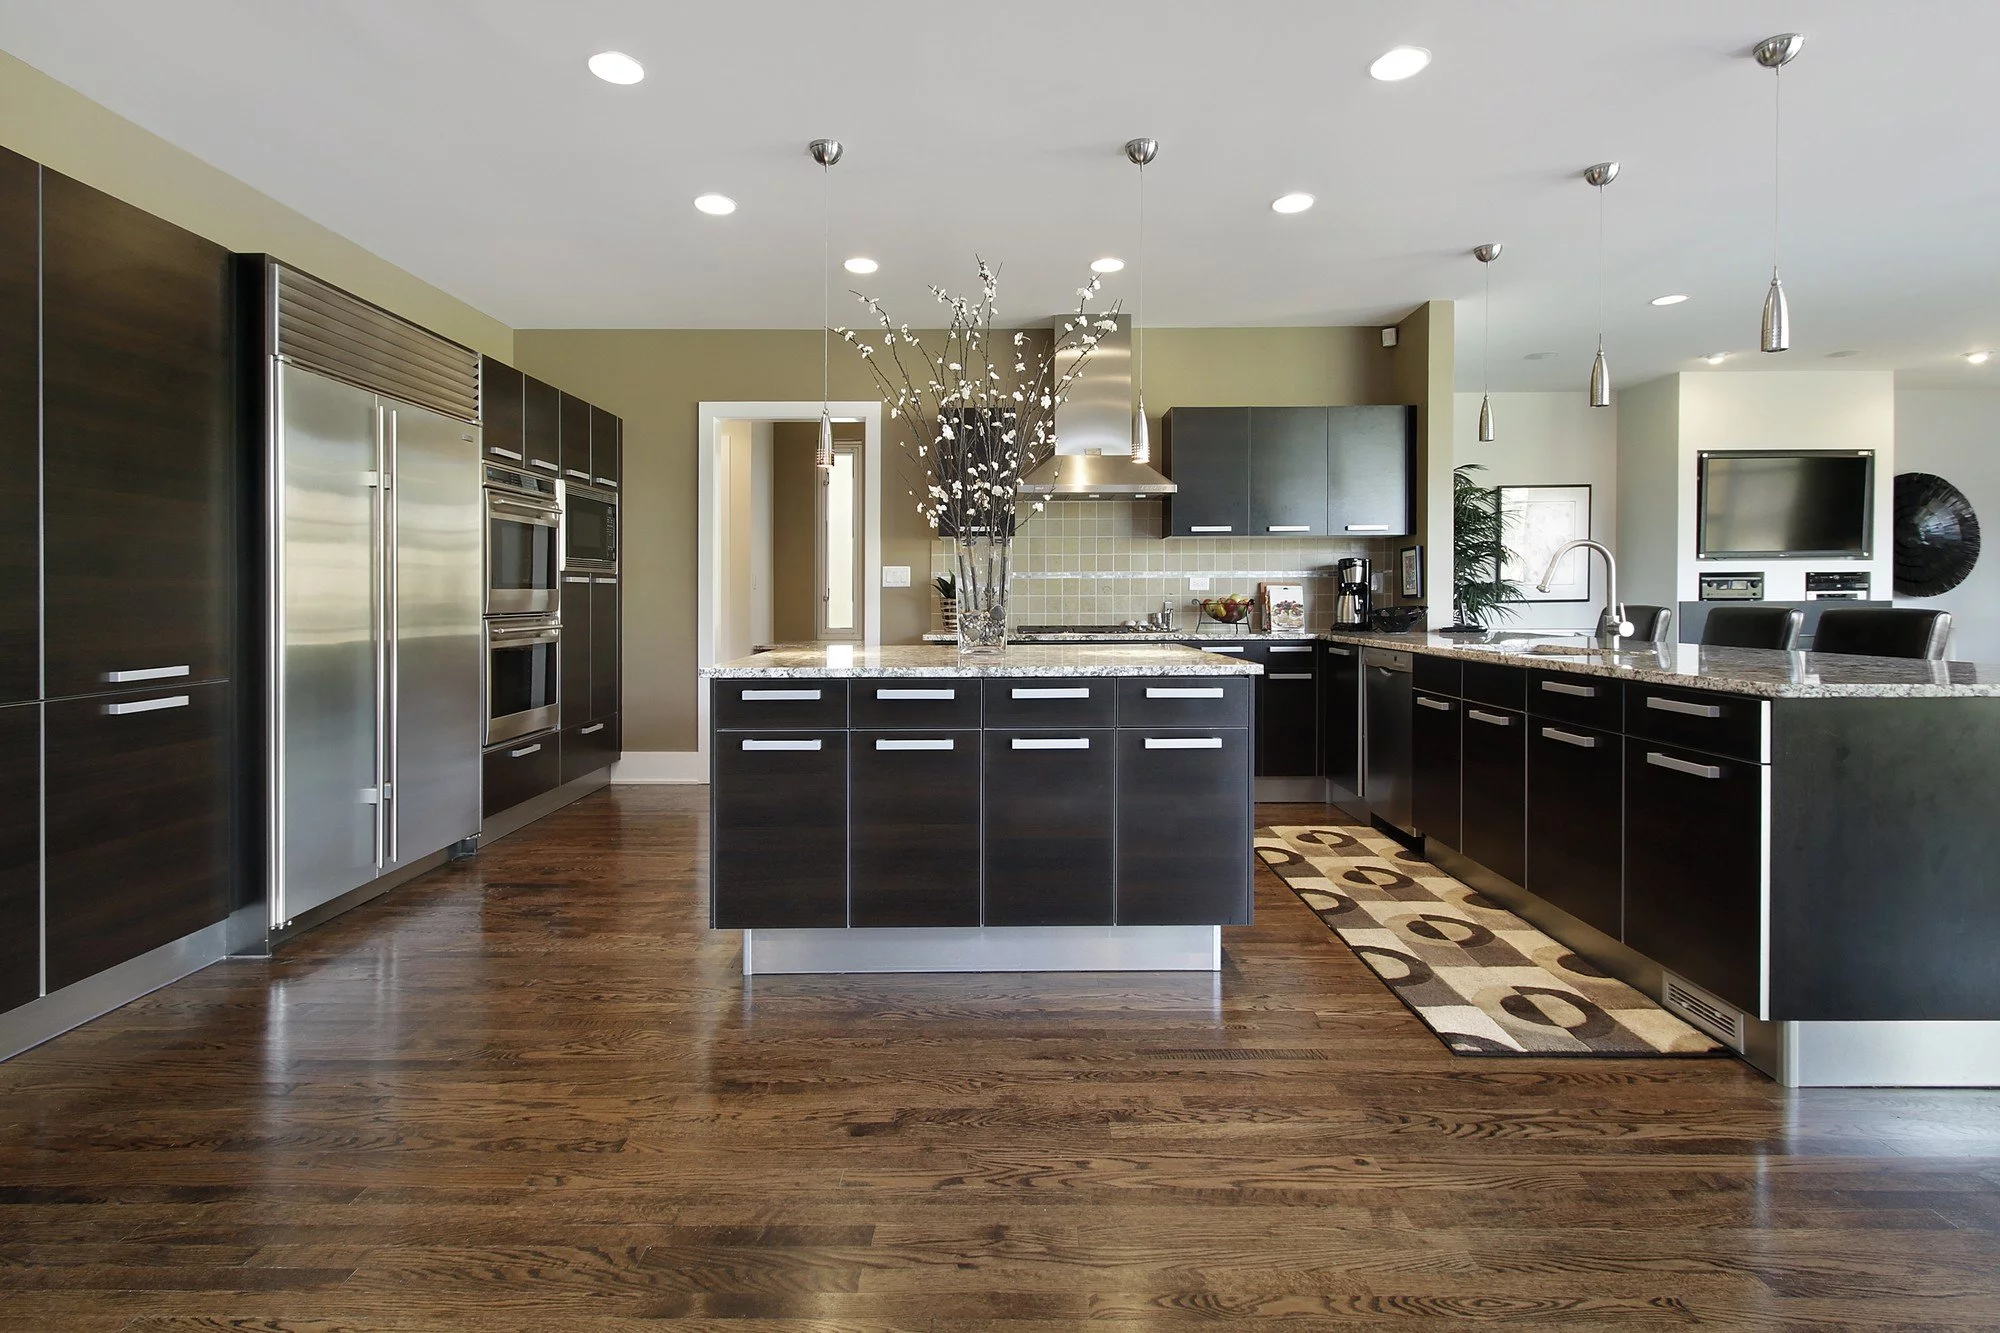 Are Wood Floors in your Kitchen a Good Choice?